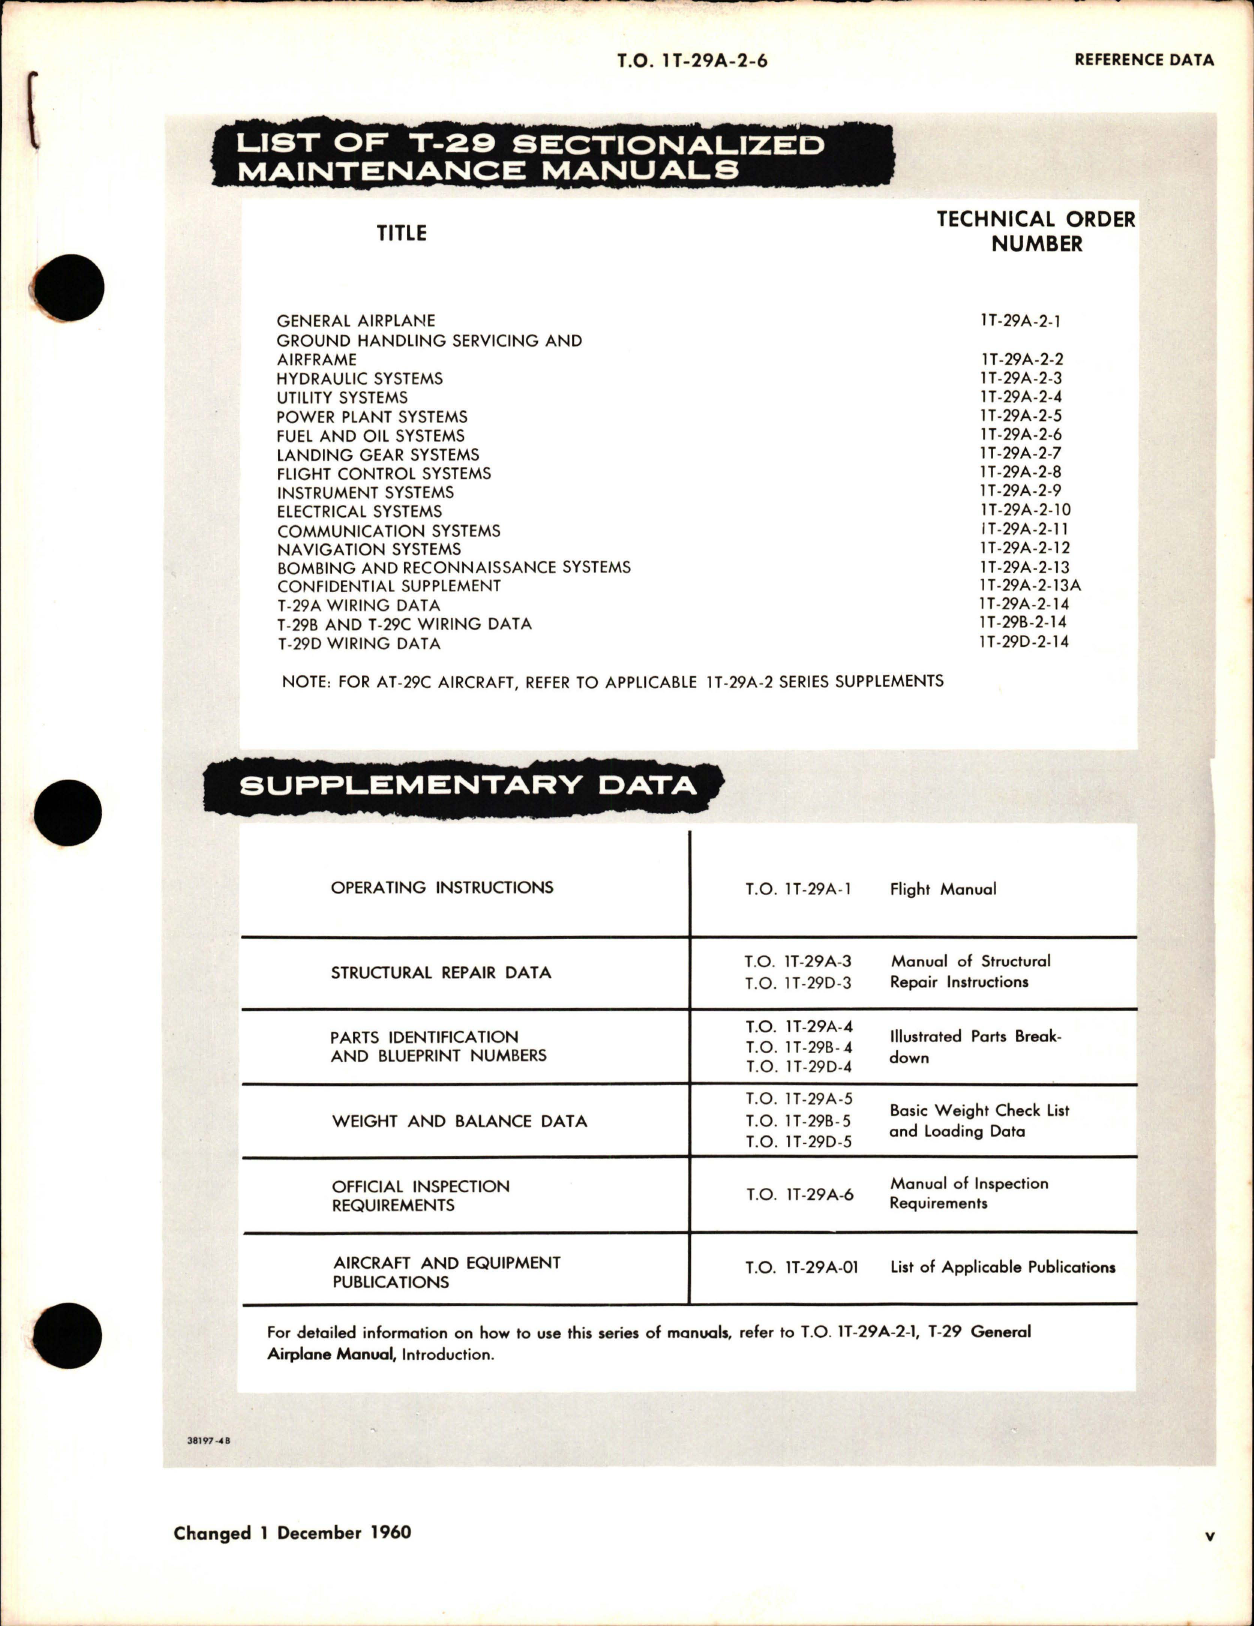 Sample page 7 from AirCorps Library document: Maintenance for Fuel and Oil Systems for AT-29C